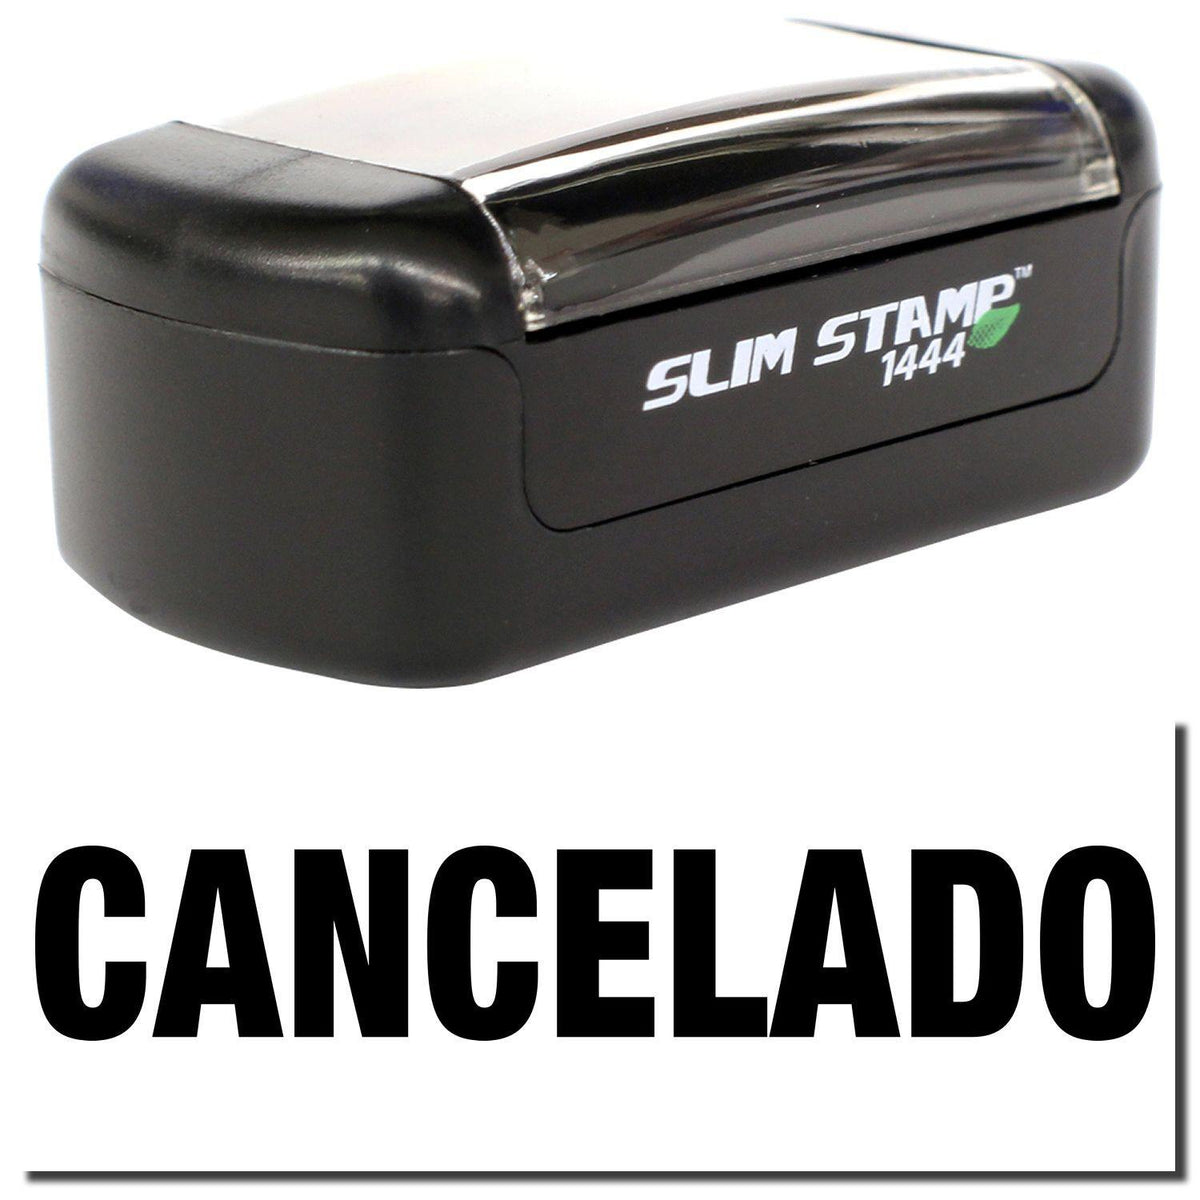 A stock office pre-inked stamp with a stamped image showing how the text &quot;CANCELADO&quot; is displayed after stamping.